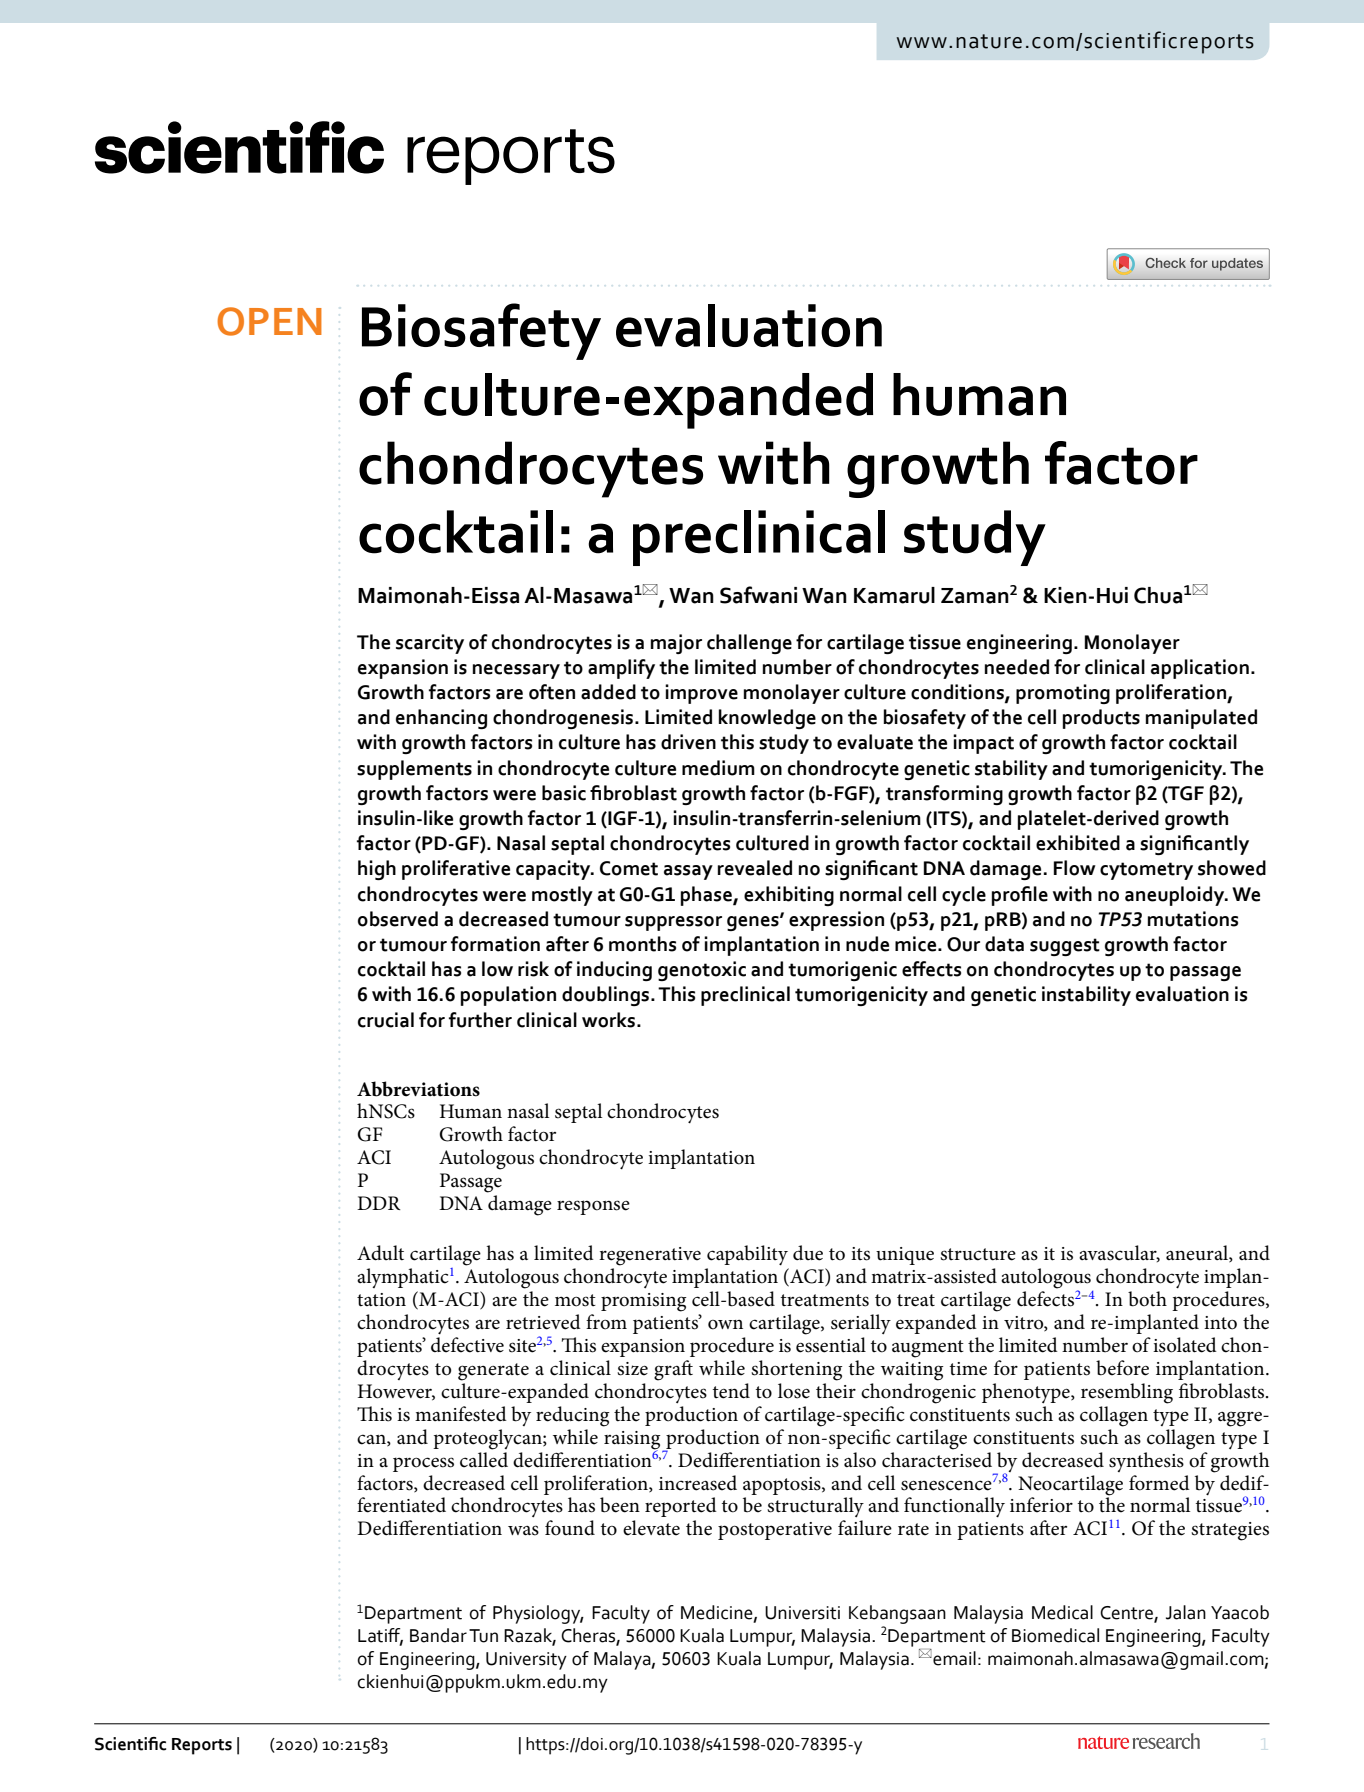 Biosafety Evaluation of Culture-Expanded Human Chondrocytes with Growth Factor Cocktail: A Preclinical Study